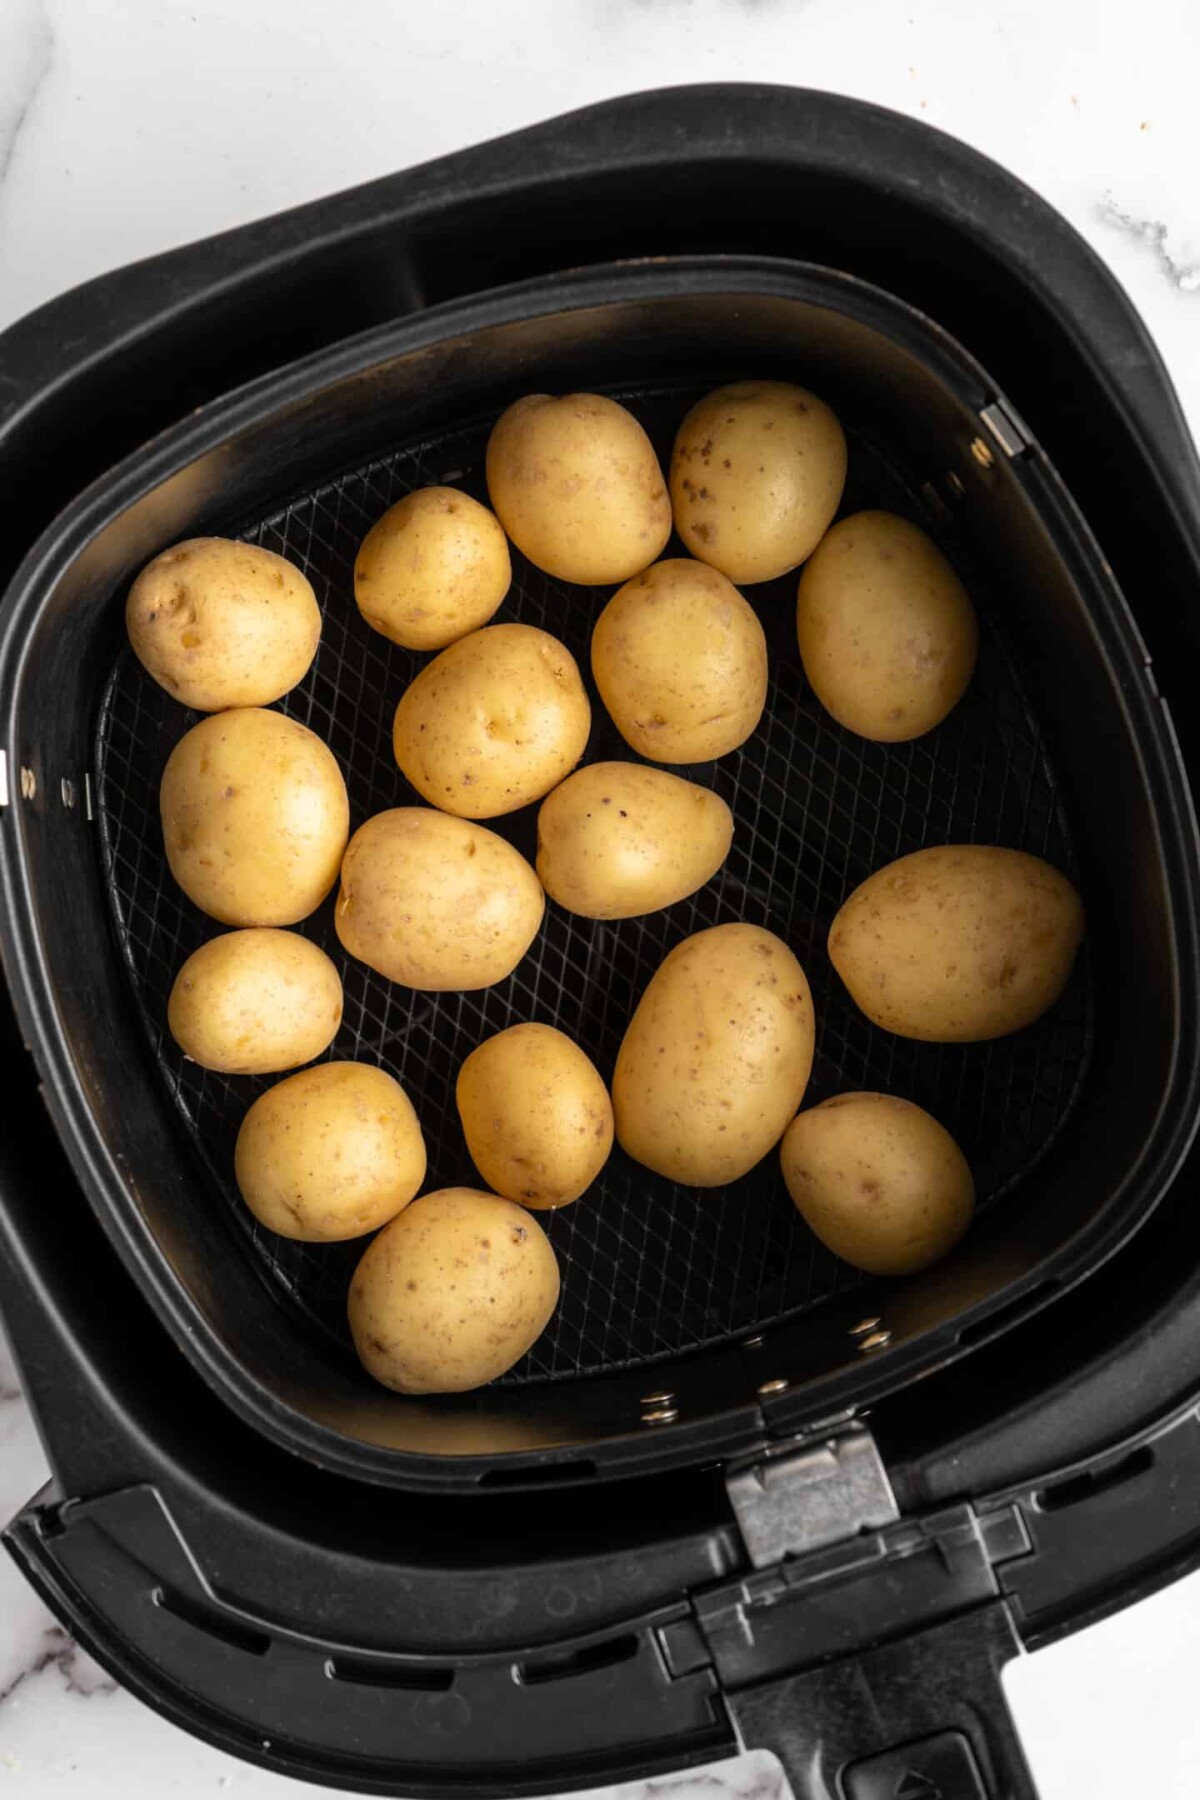 Uncooked baby potatoes in an air fryer basket